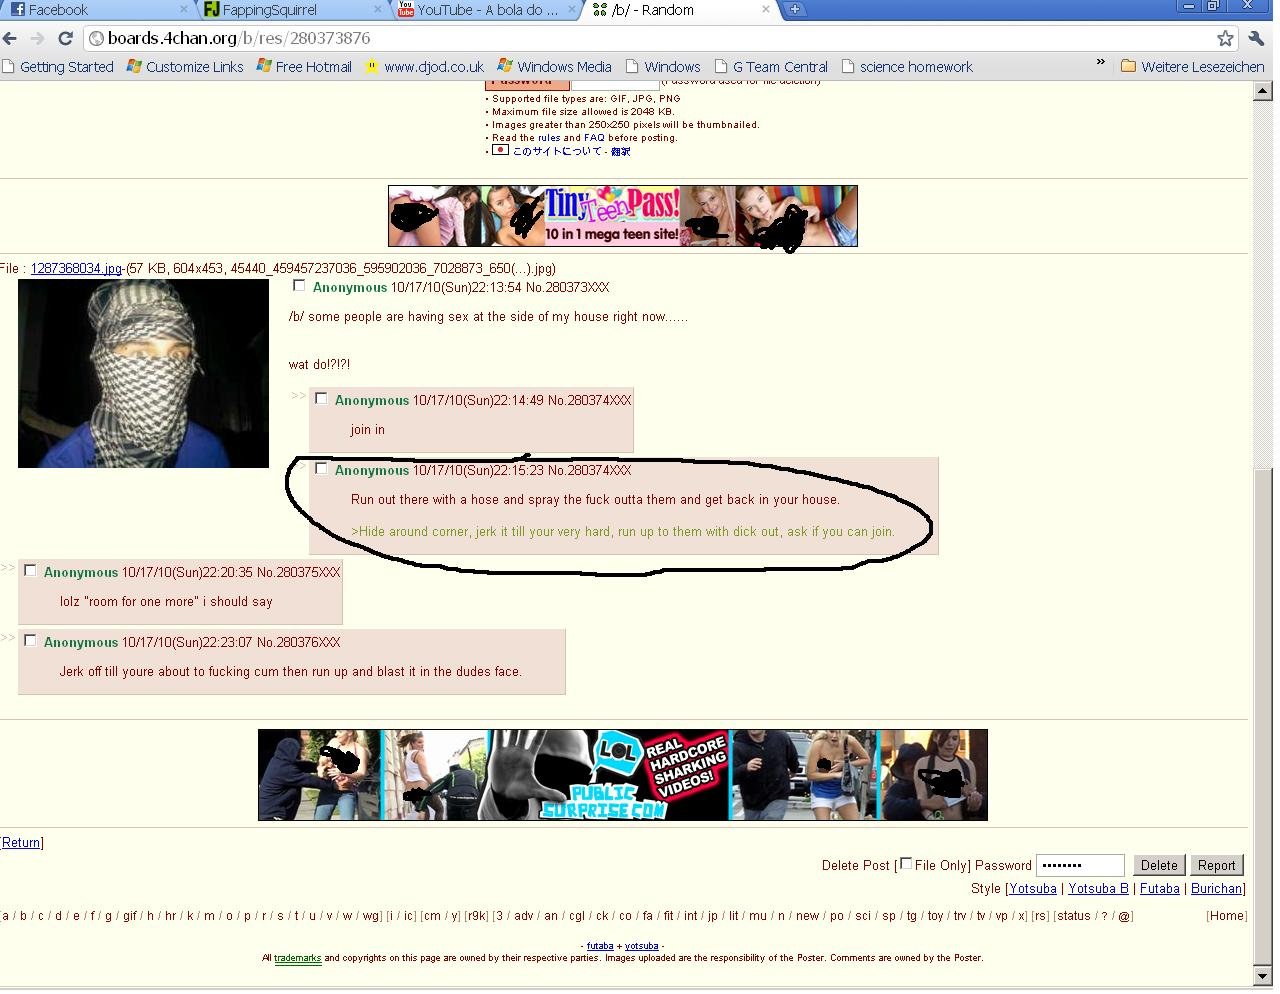 delete post on 4chan